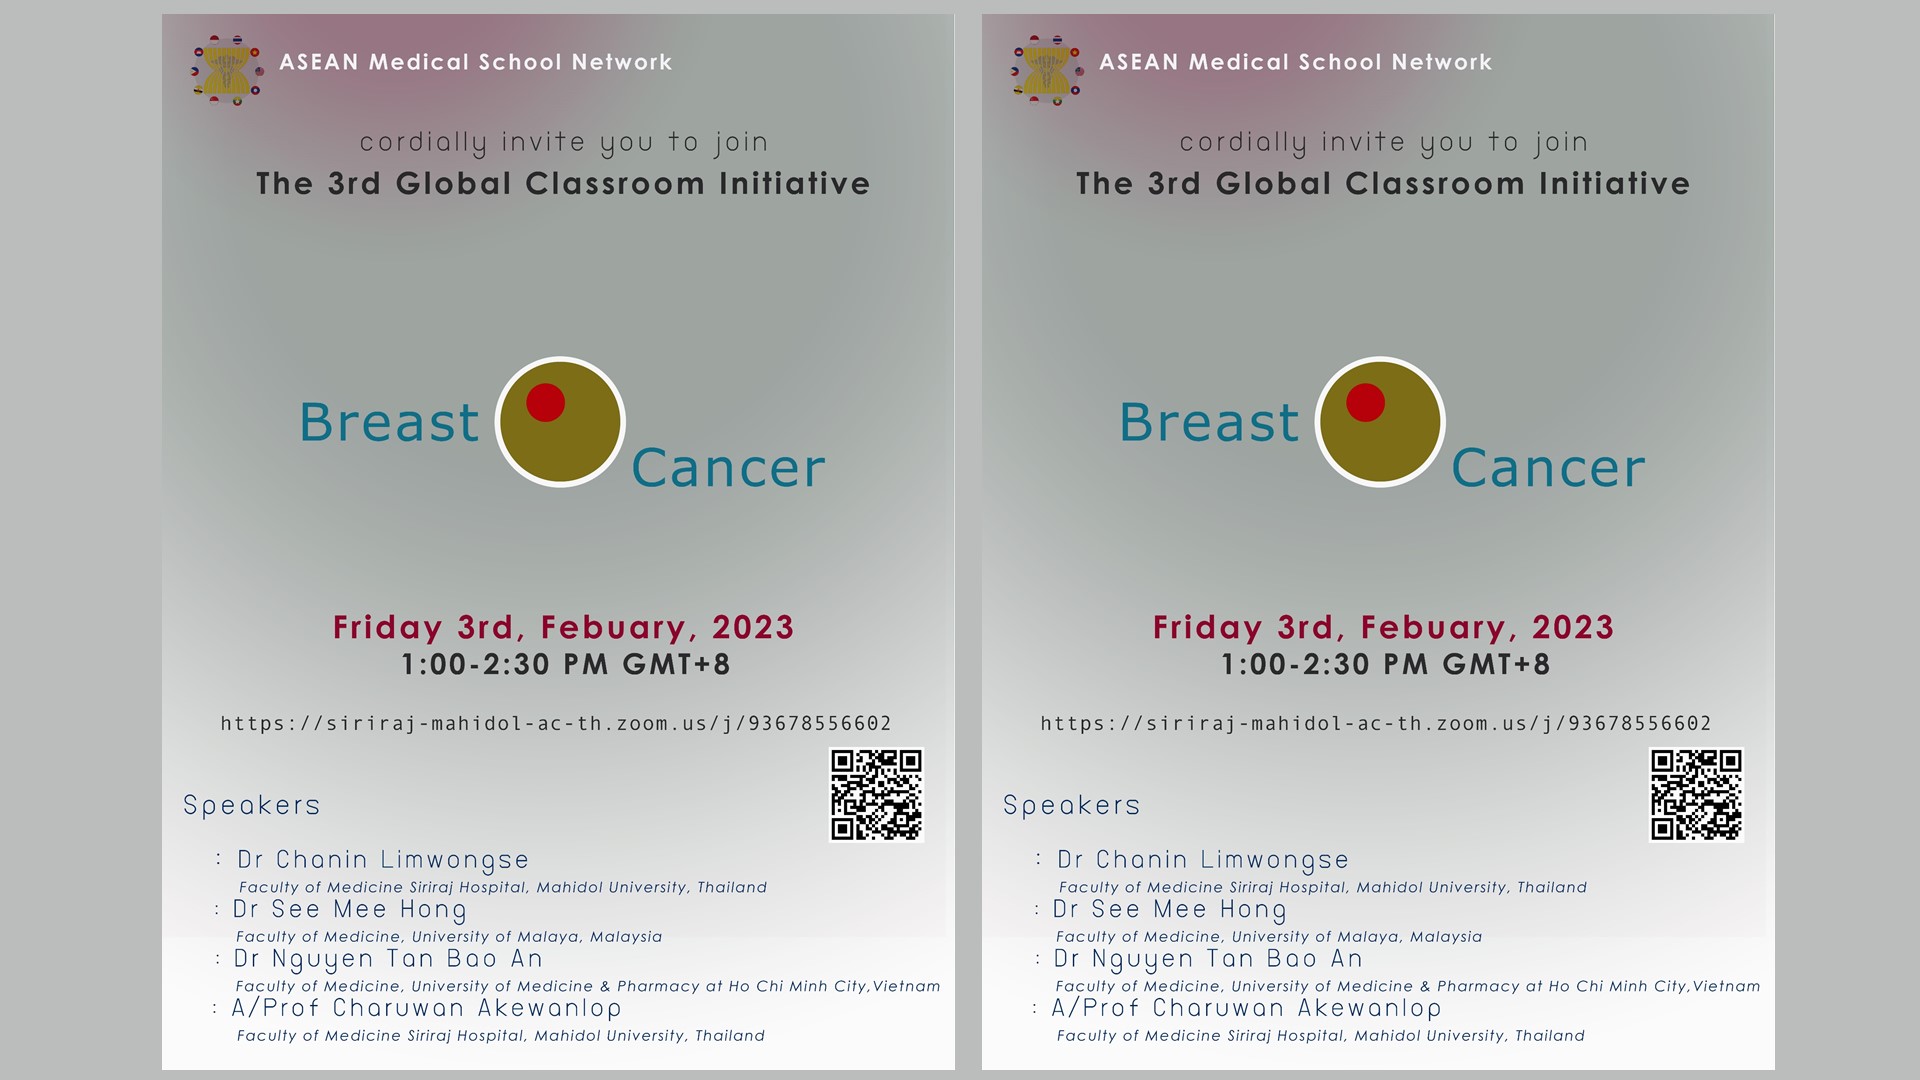 The 3rd Global Classroom Initiative: Breast Cancer!